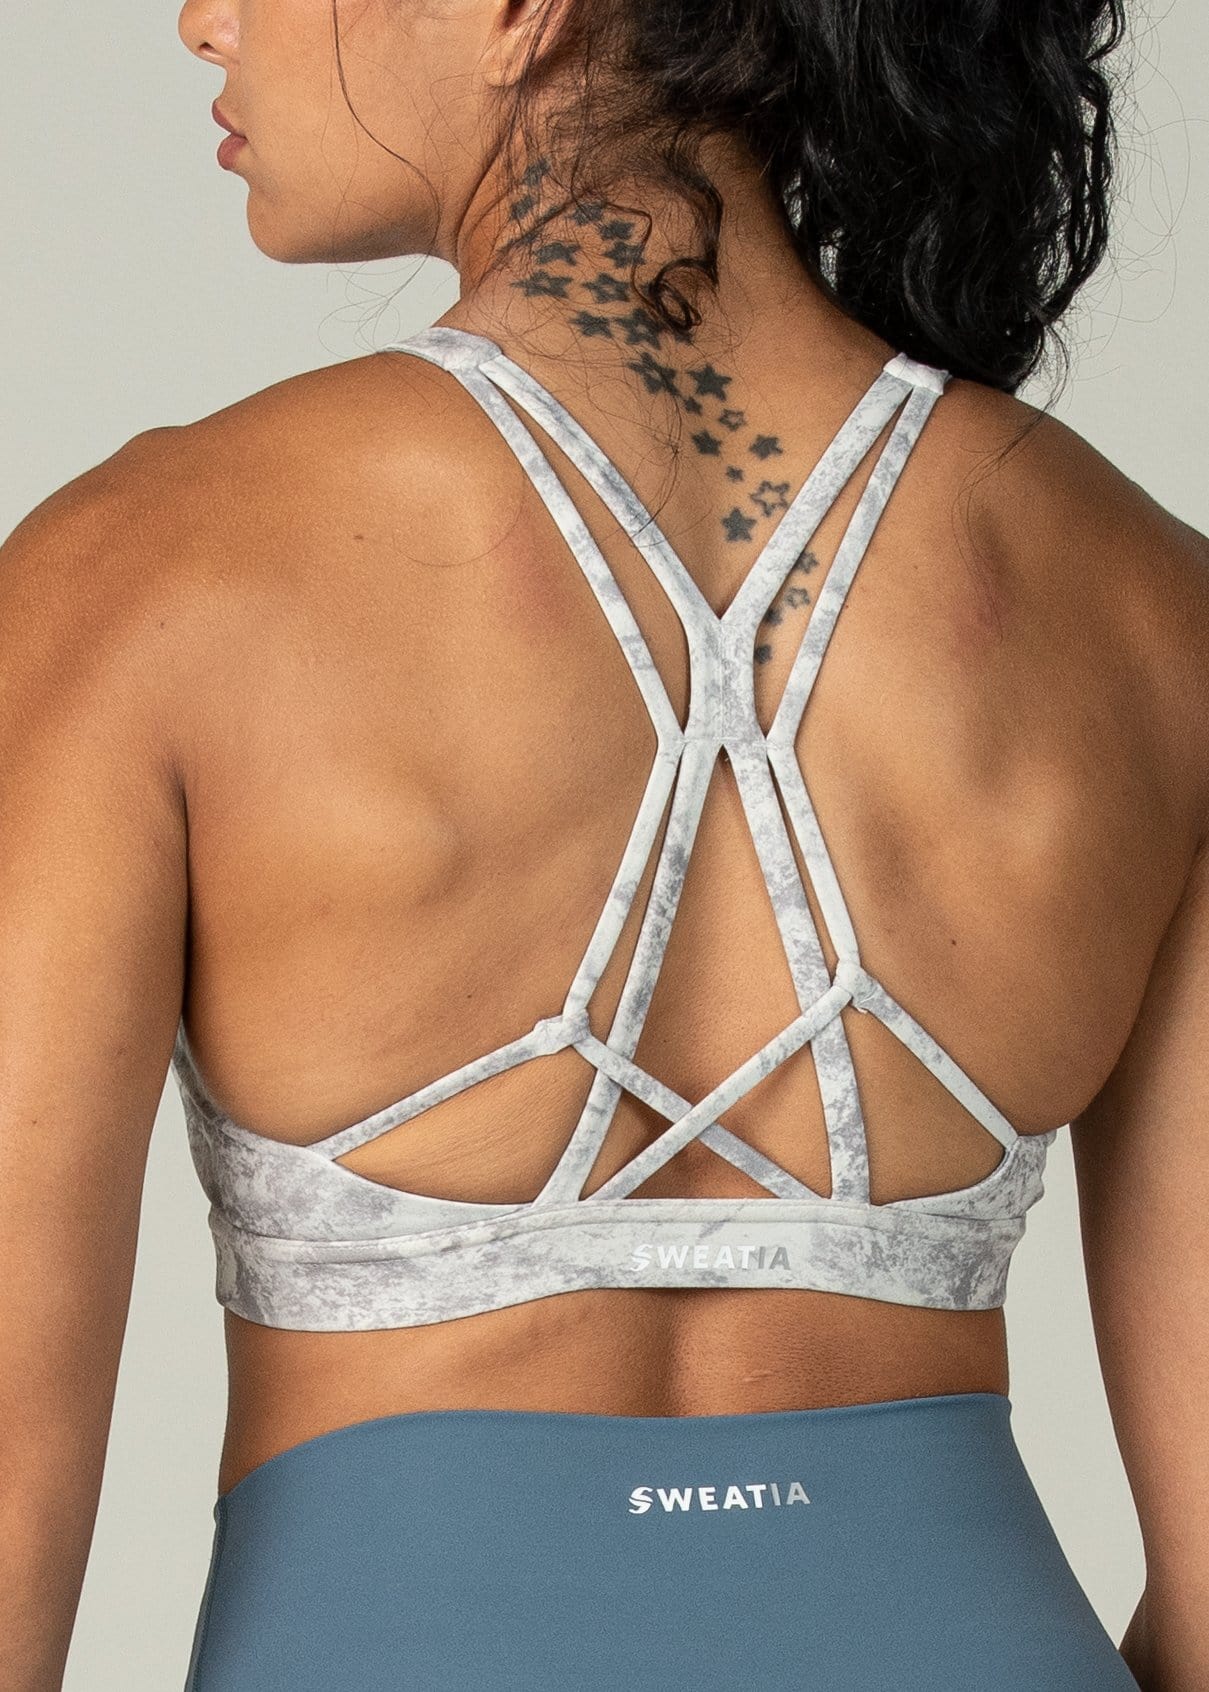 Champion Duo Dry White and Grey Sports Bra - $10 - From Carley